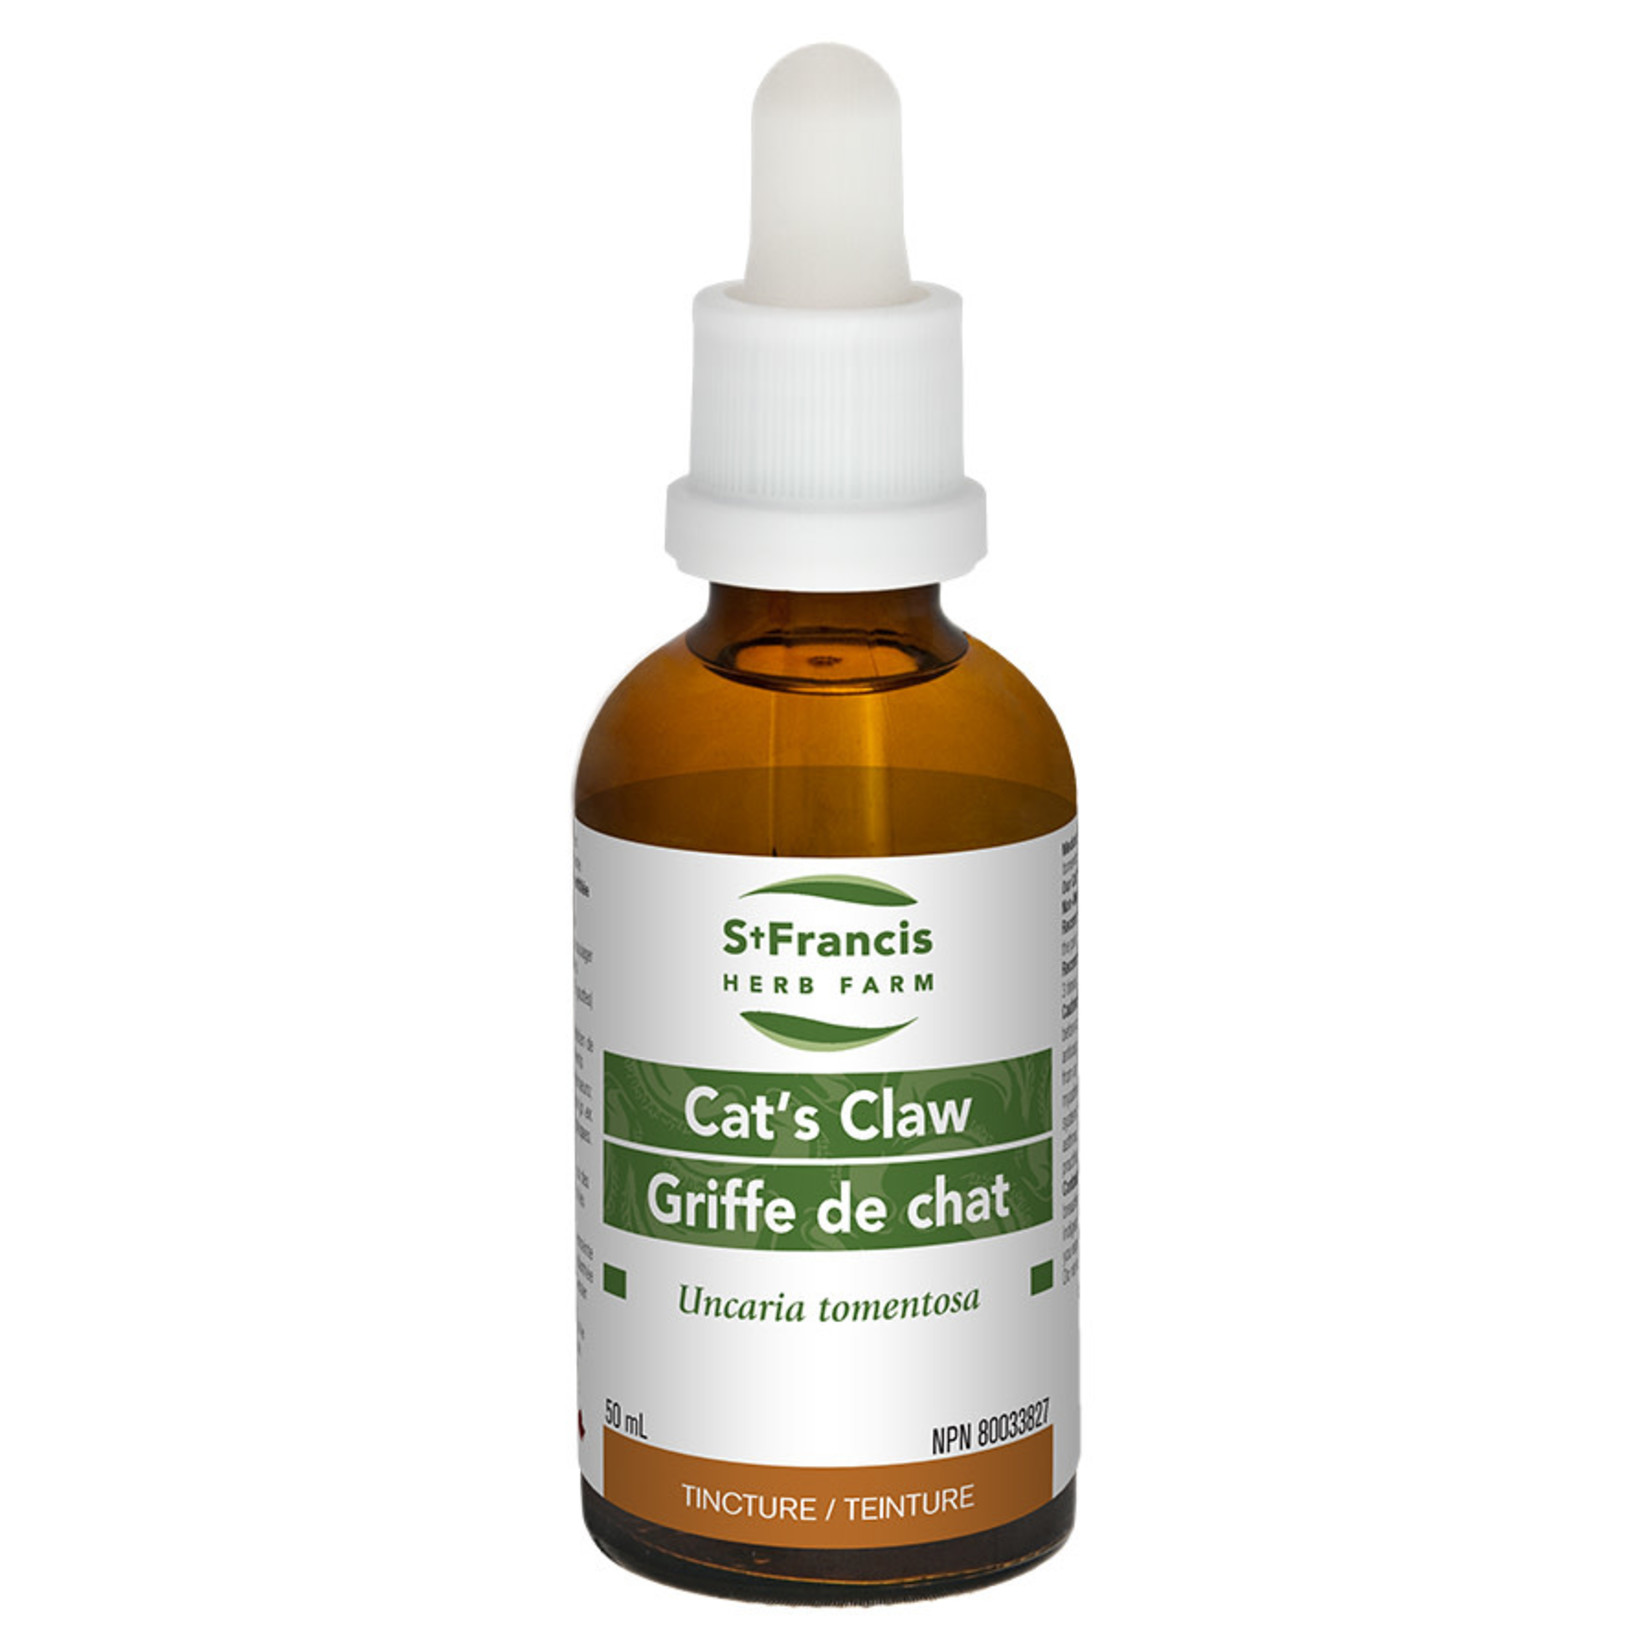 ST FRANCIS ST FRANCIS CAT'S CLAW TINCTURE 50ML